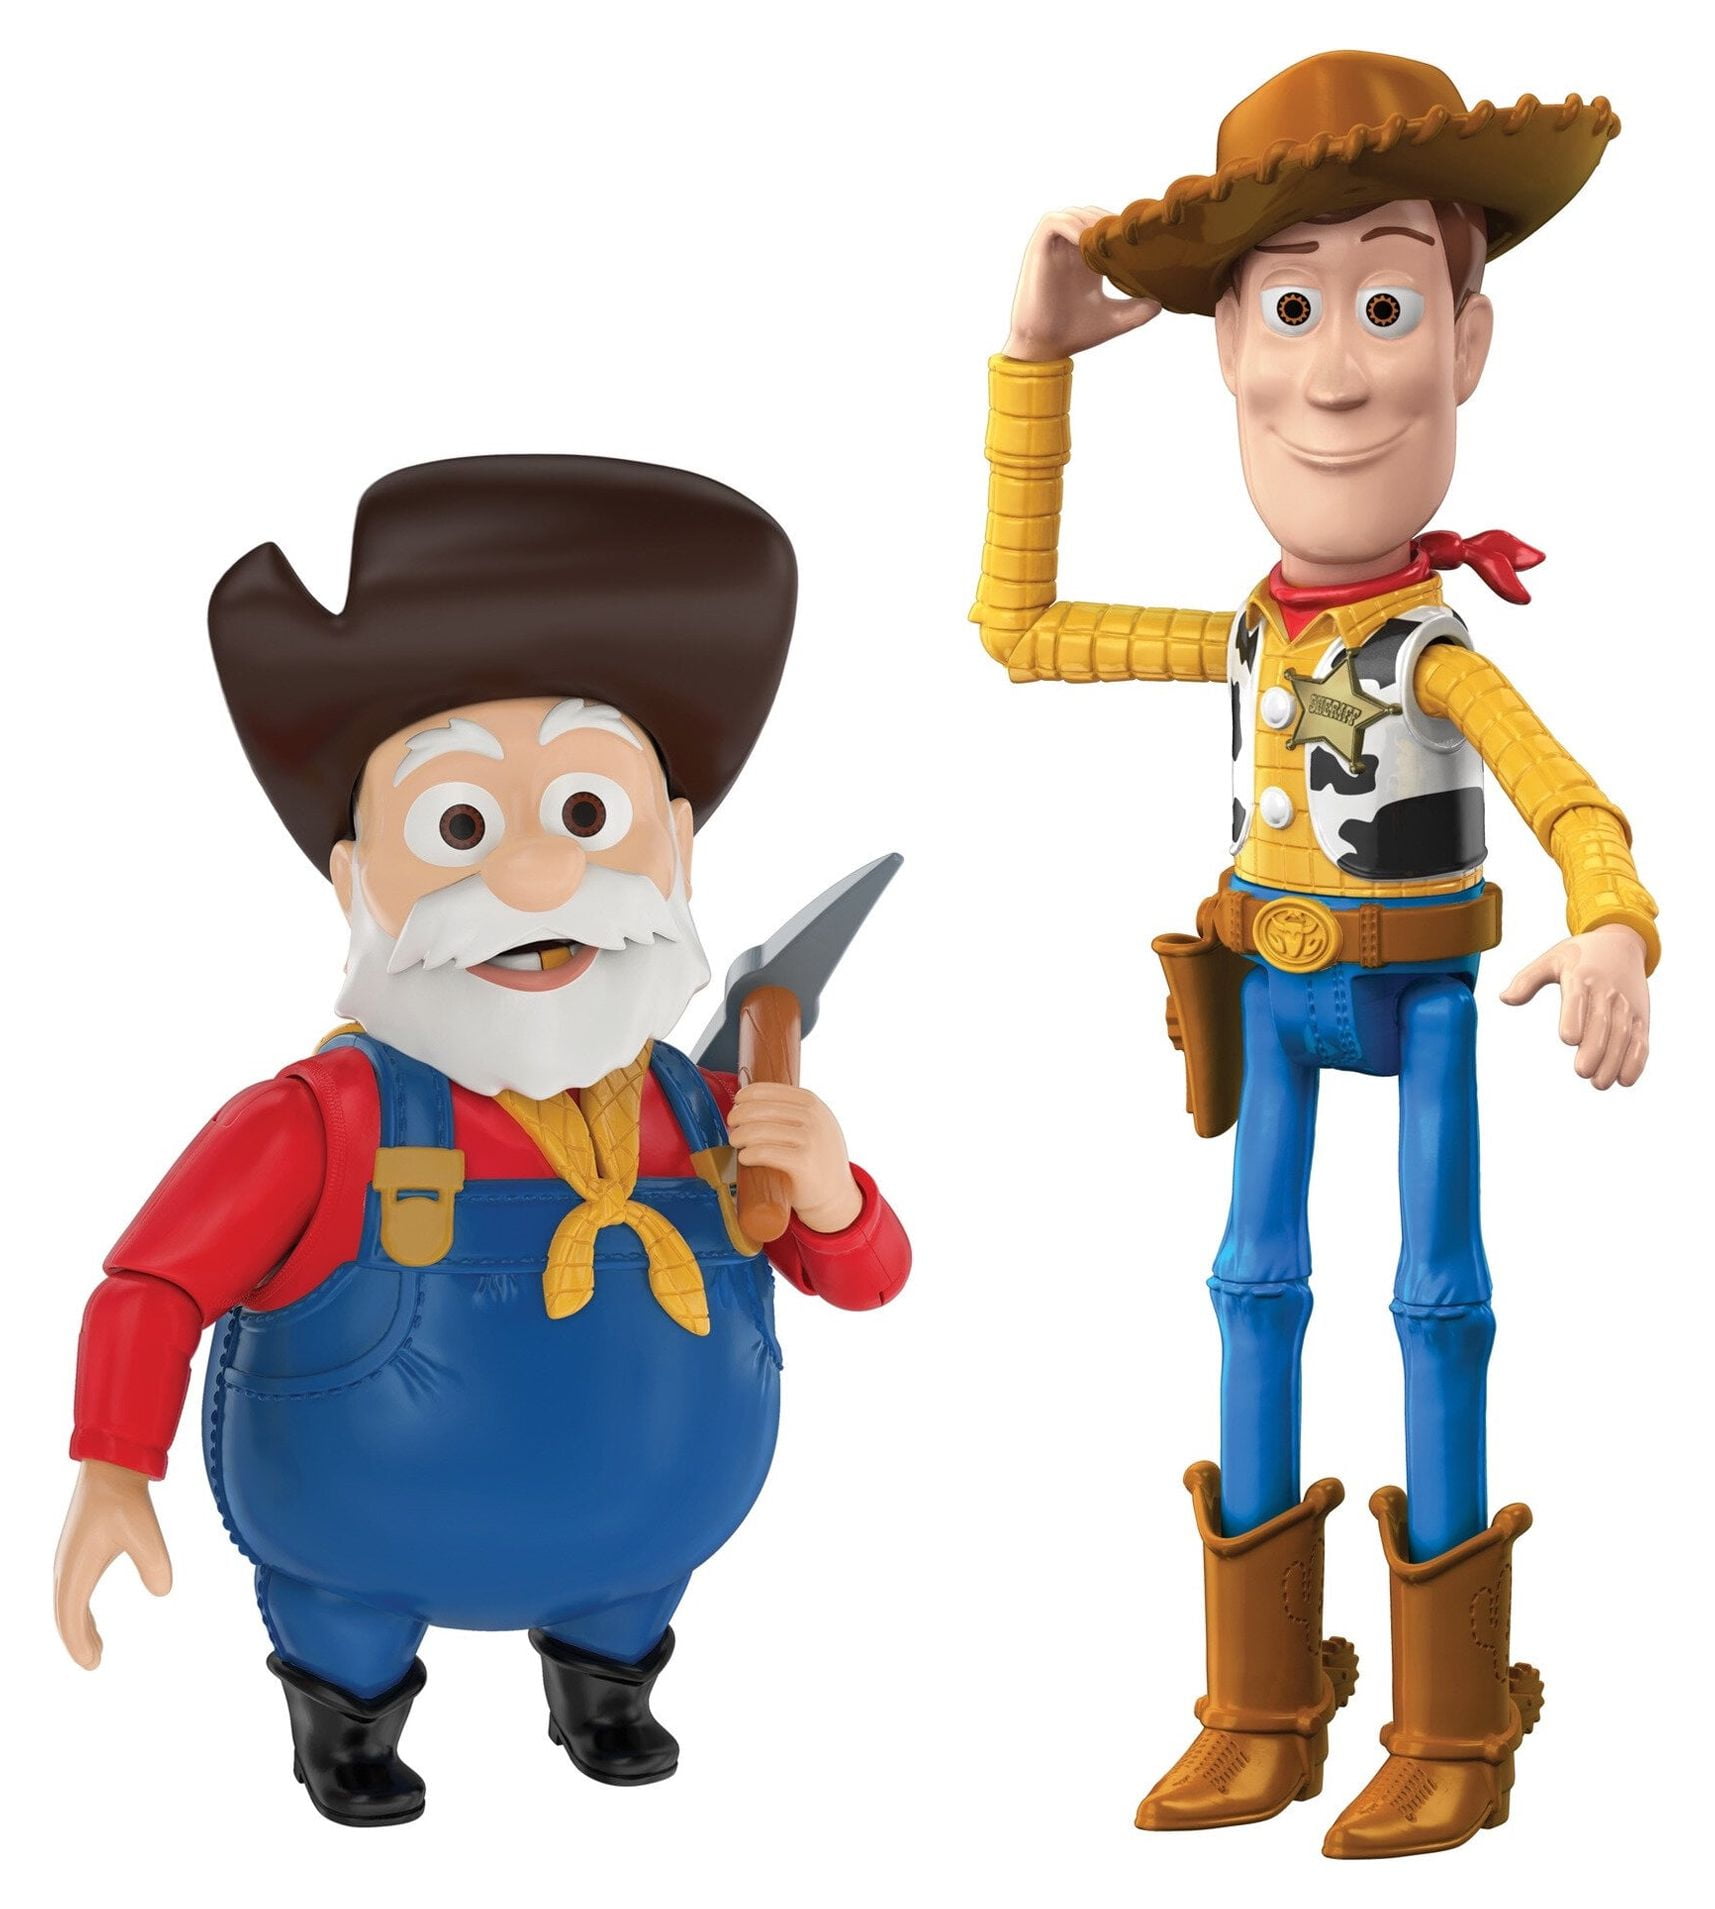 Disney Pixar Toy Story Woody's Round-Up Classic Pack Action Figures (9.2)